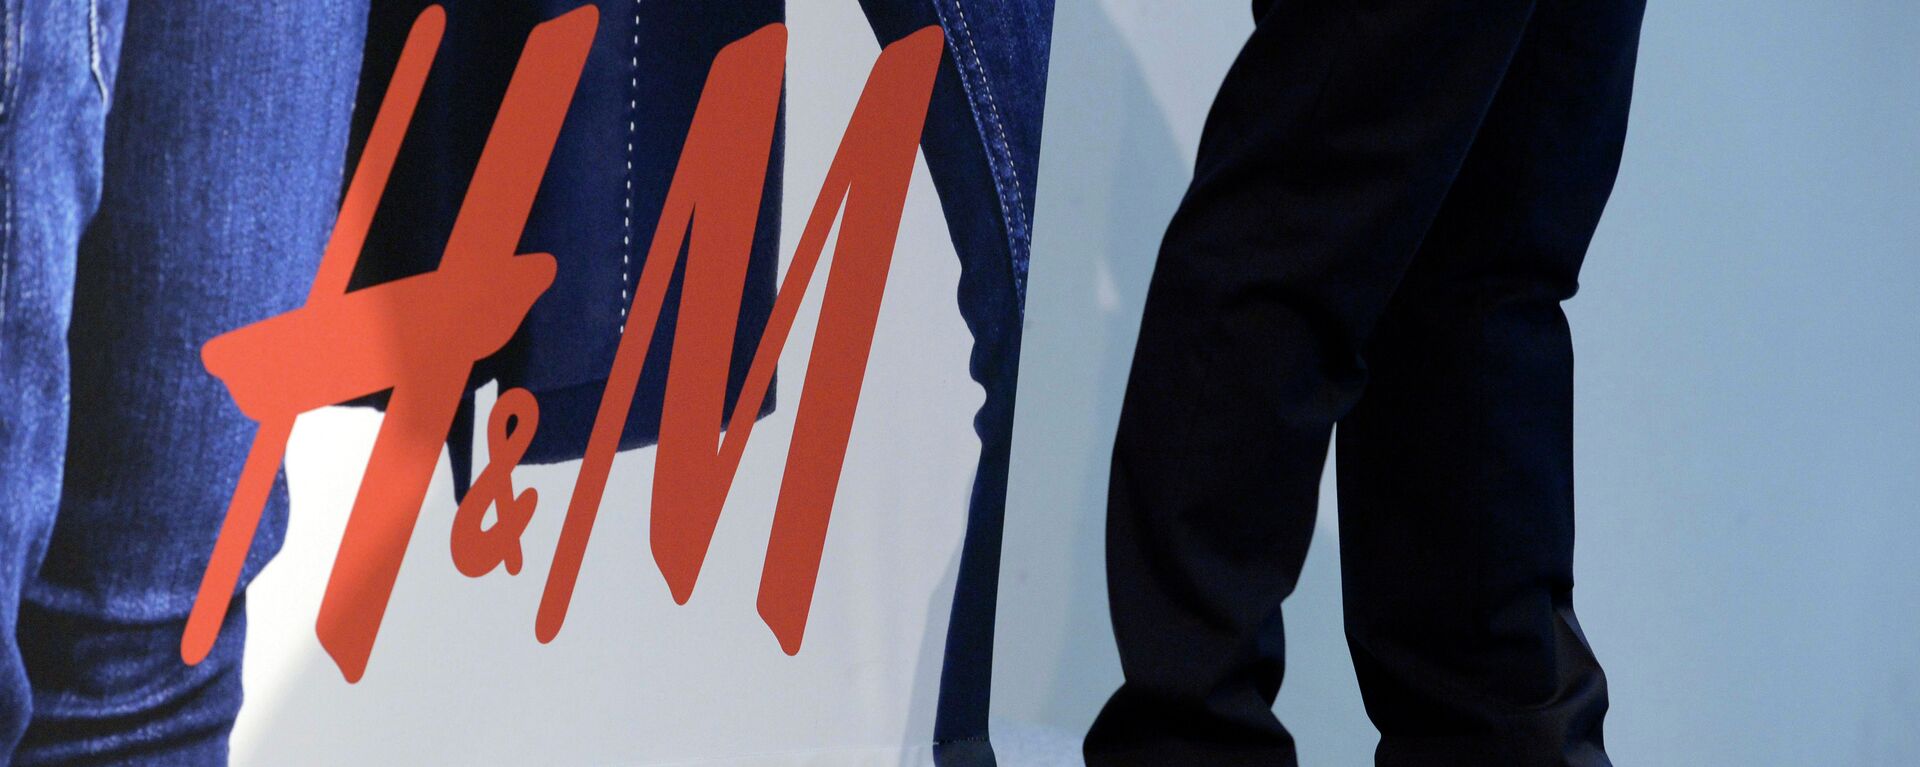 The logo of Swedish fashion retailer Hennes and Mauritz (H&M) is seen during a presentation of the company's interim report for the third quarter during a news conference in Stockholm on September 25, 2014 - Sputnik International, 1920, 29.09.2022